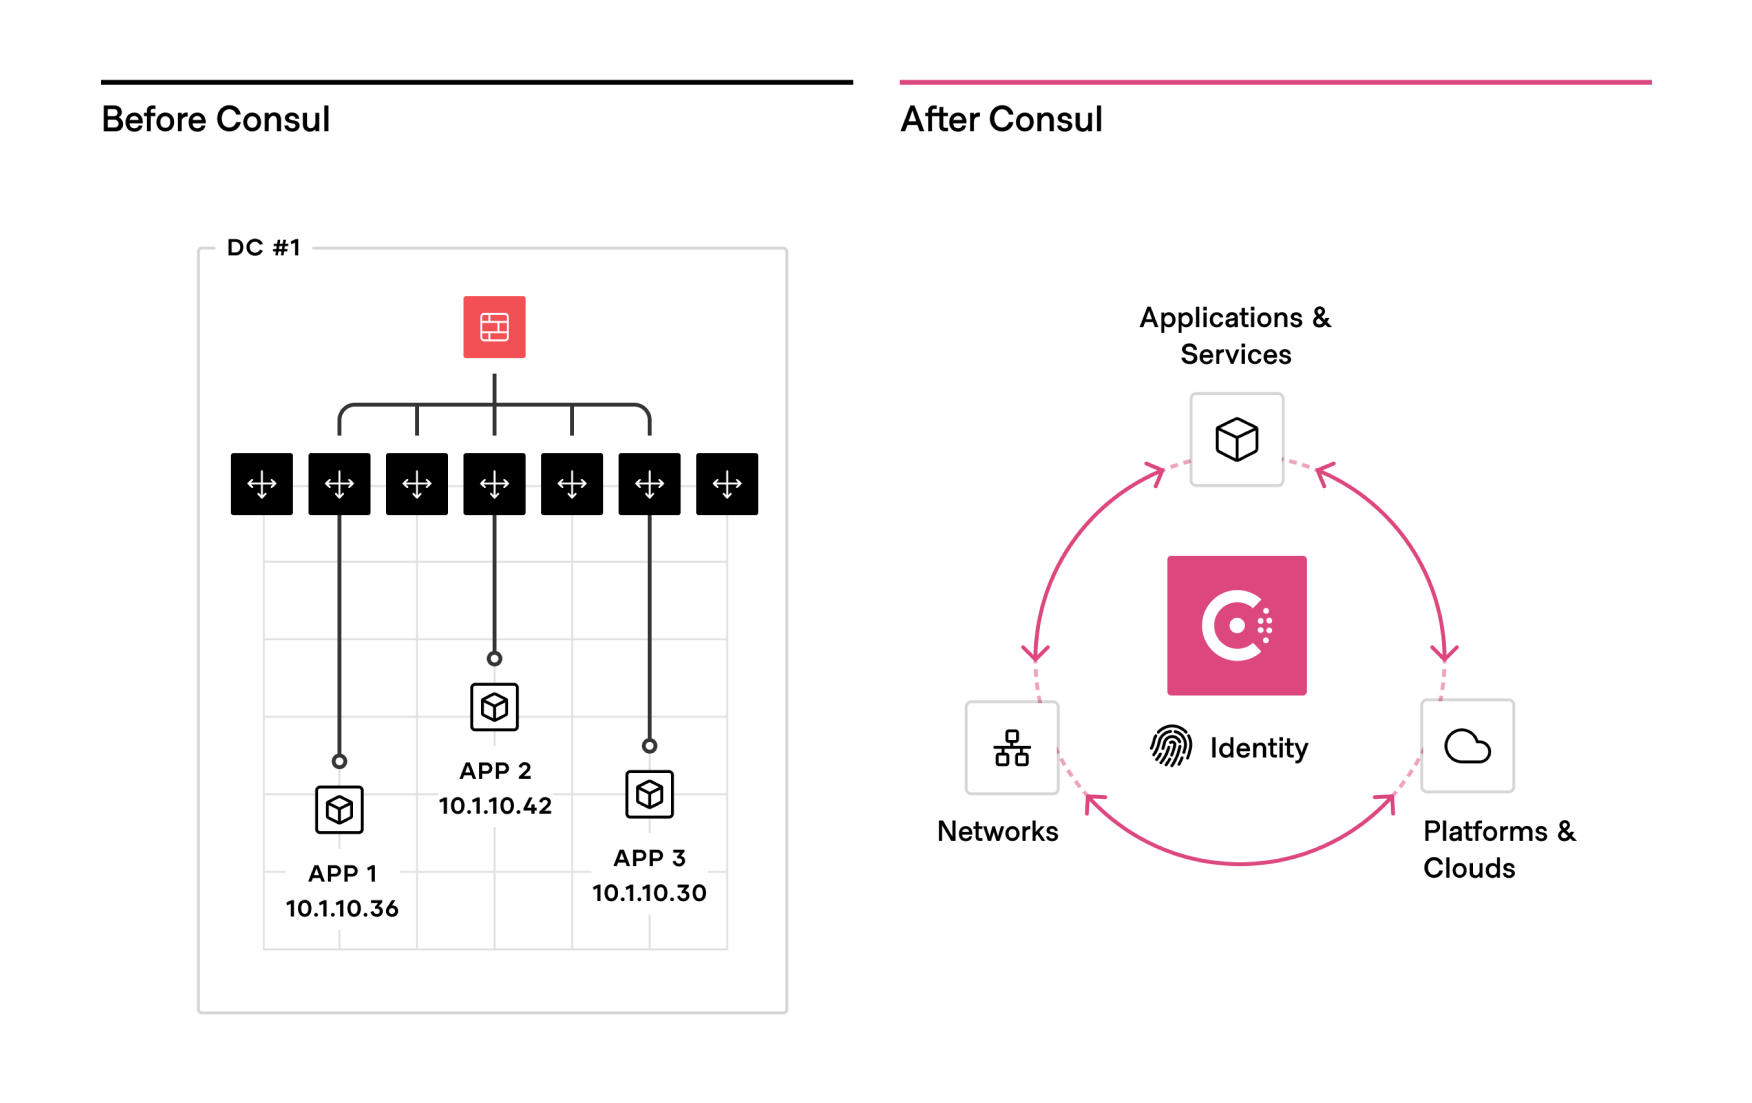 <em>Historically, networking involved manual activities that connect hosts and static IP addresses. HashiCorp Consul gives modern cloud architectures and platform teams an automated, services-centric approach.</em>